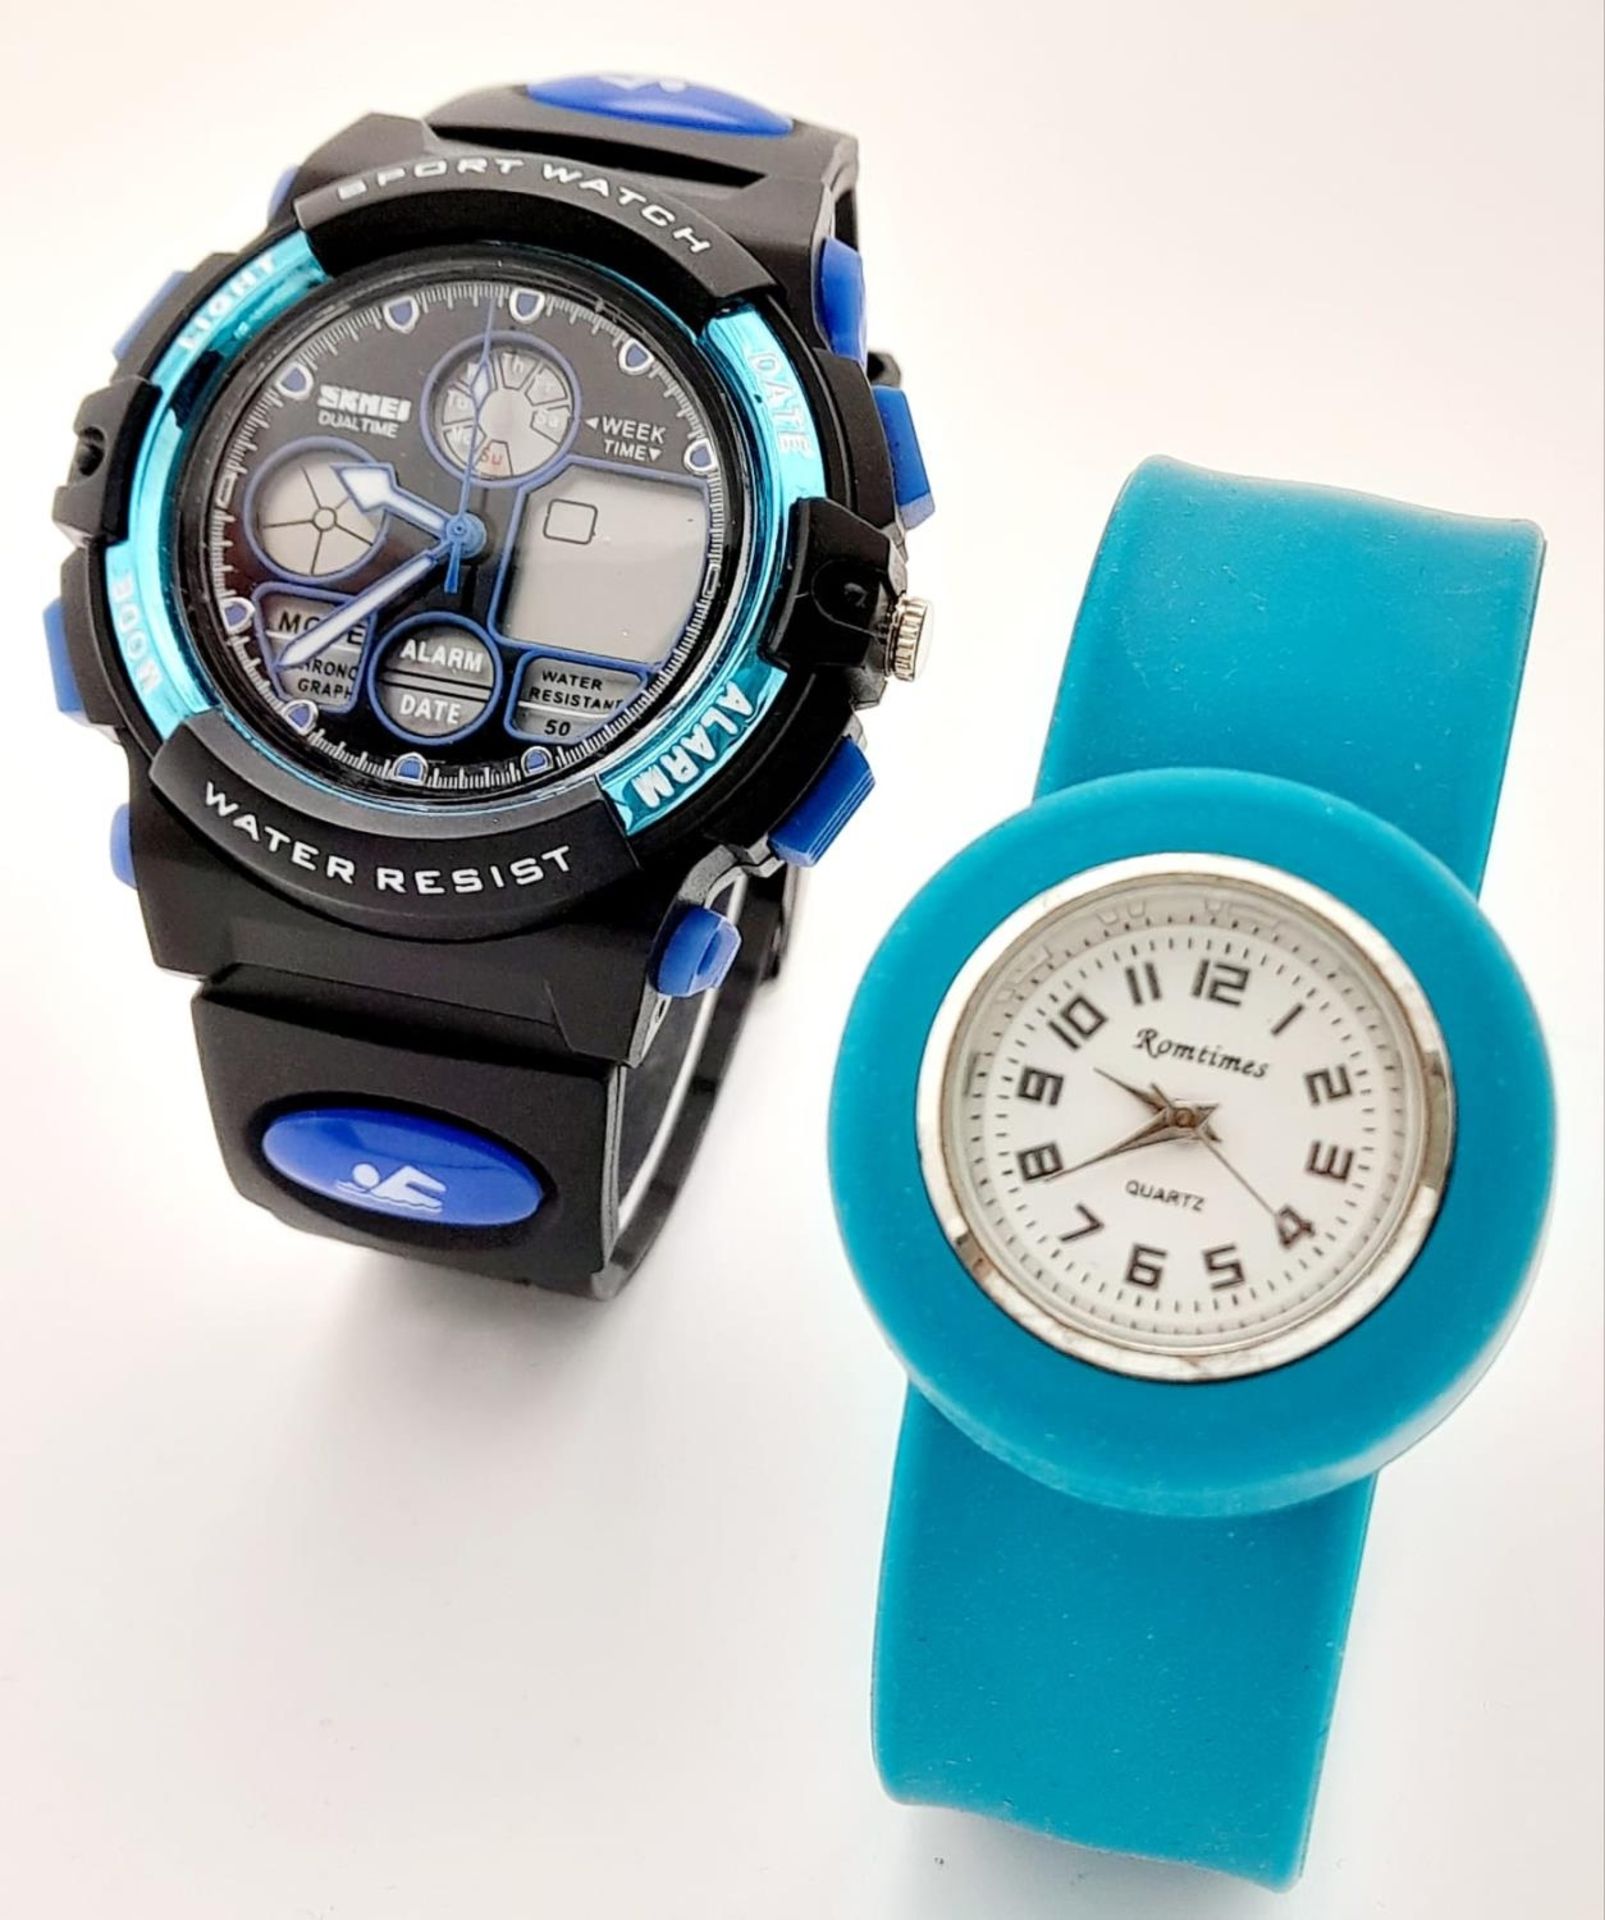 Two Sports Watches, One Ladies, One Men’s Comprising 1) A Men’s Sports by SKMEI (47mm Case) & 2) A